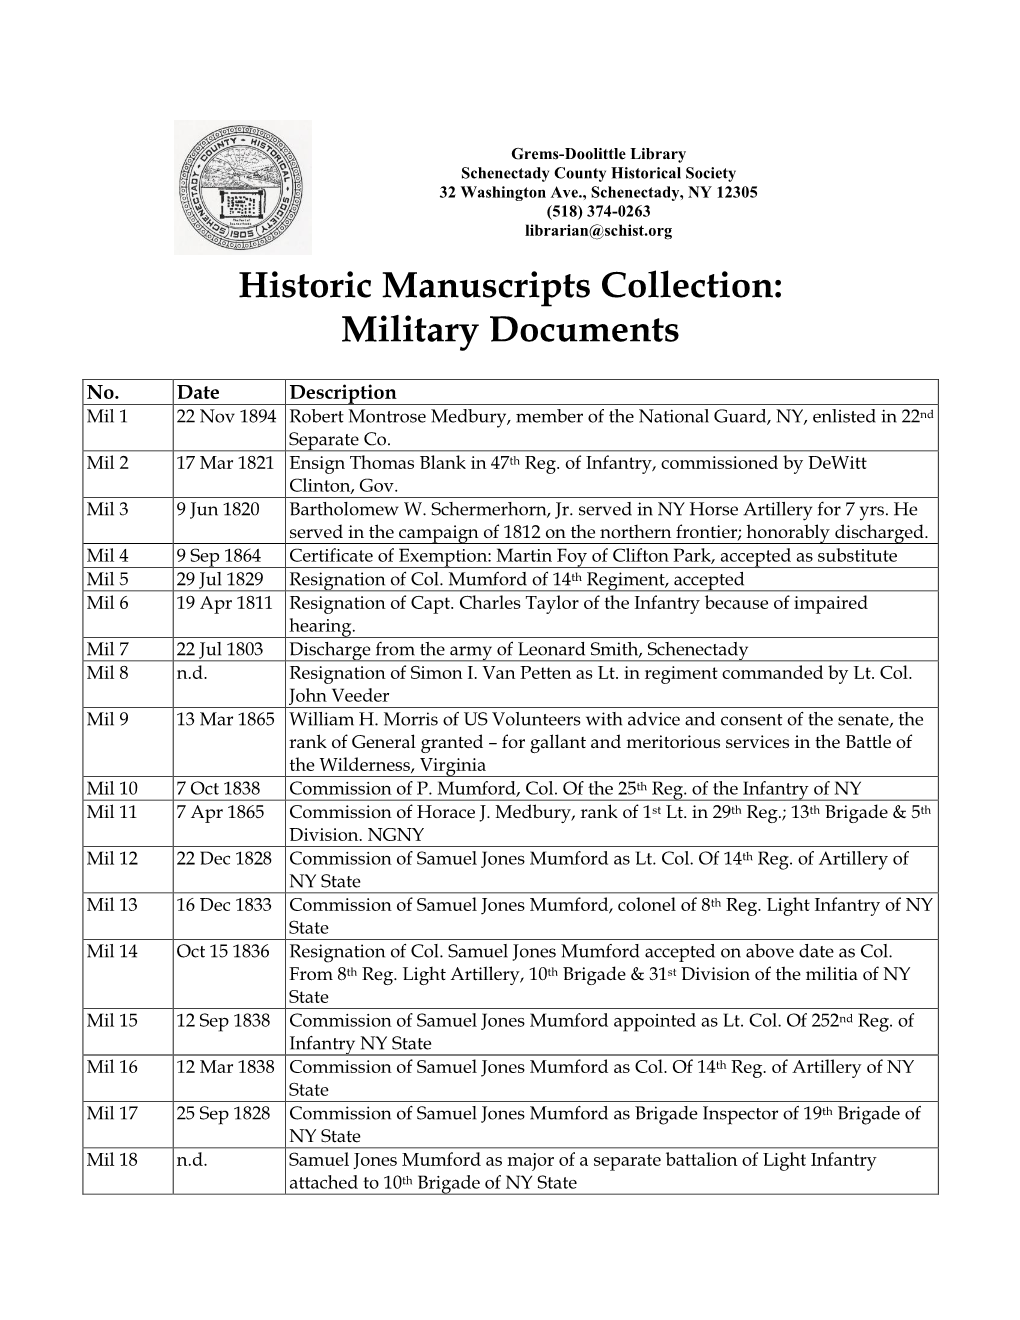 Historic Manuscripts Collection: Military Documents